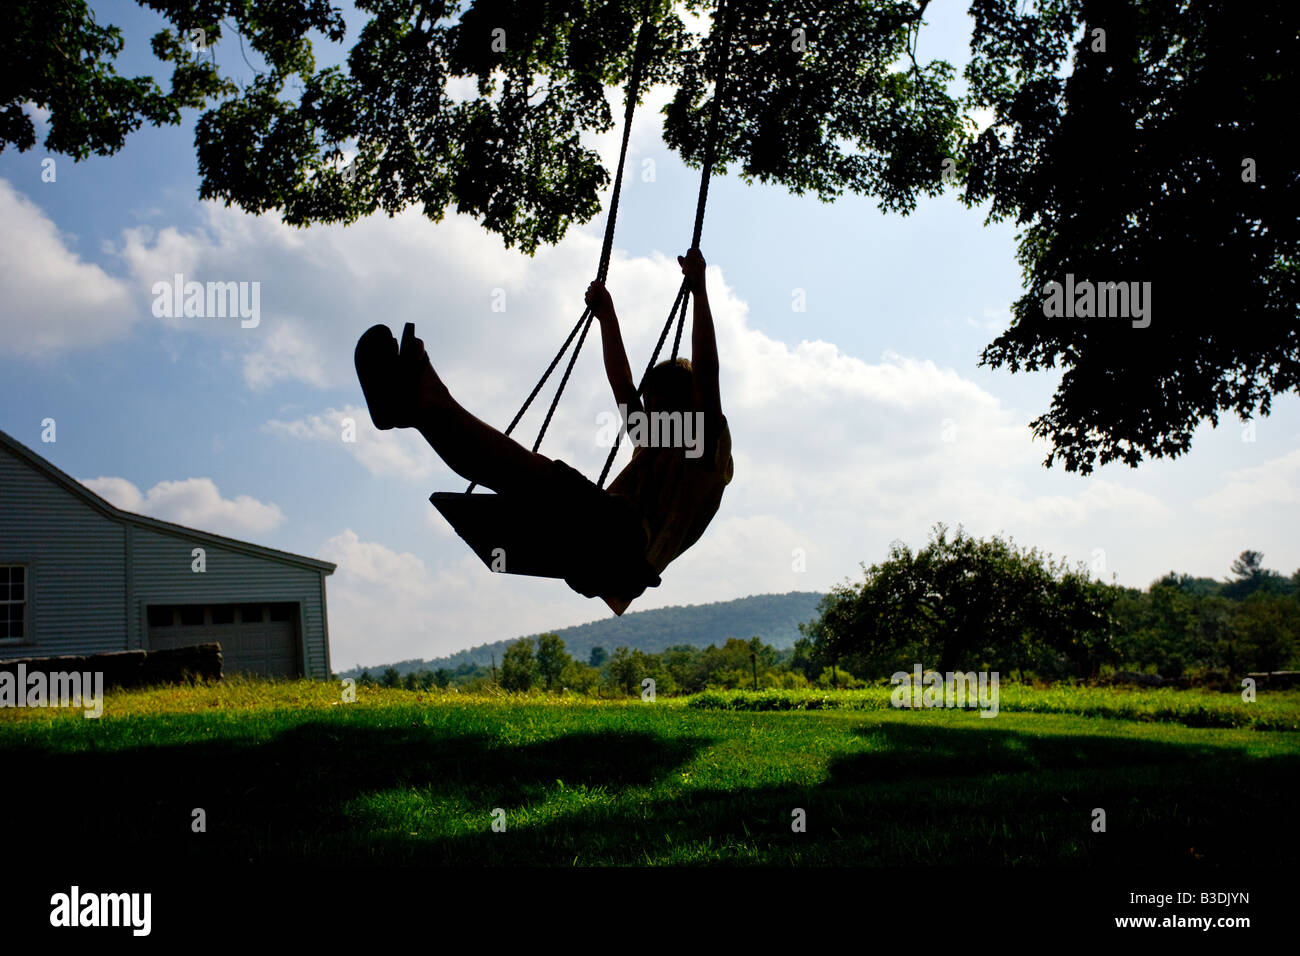 A small child on a farm rope-swing in rural Connecticut. Perfect summer concept. Stock Photo